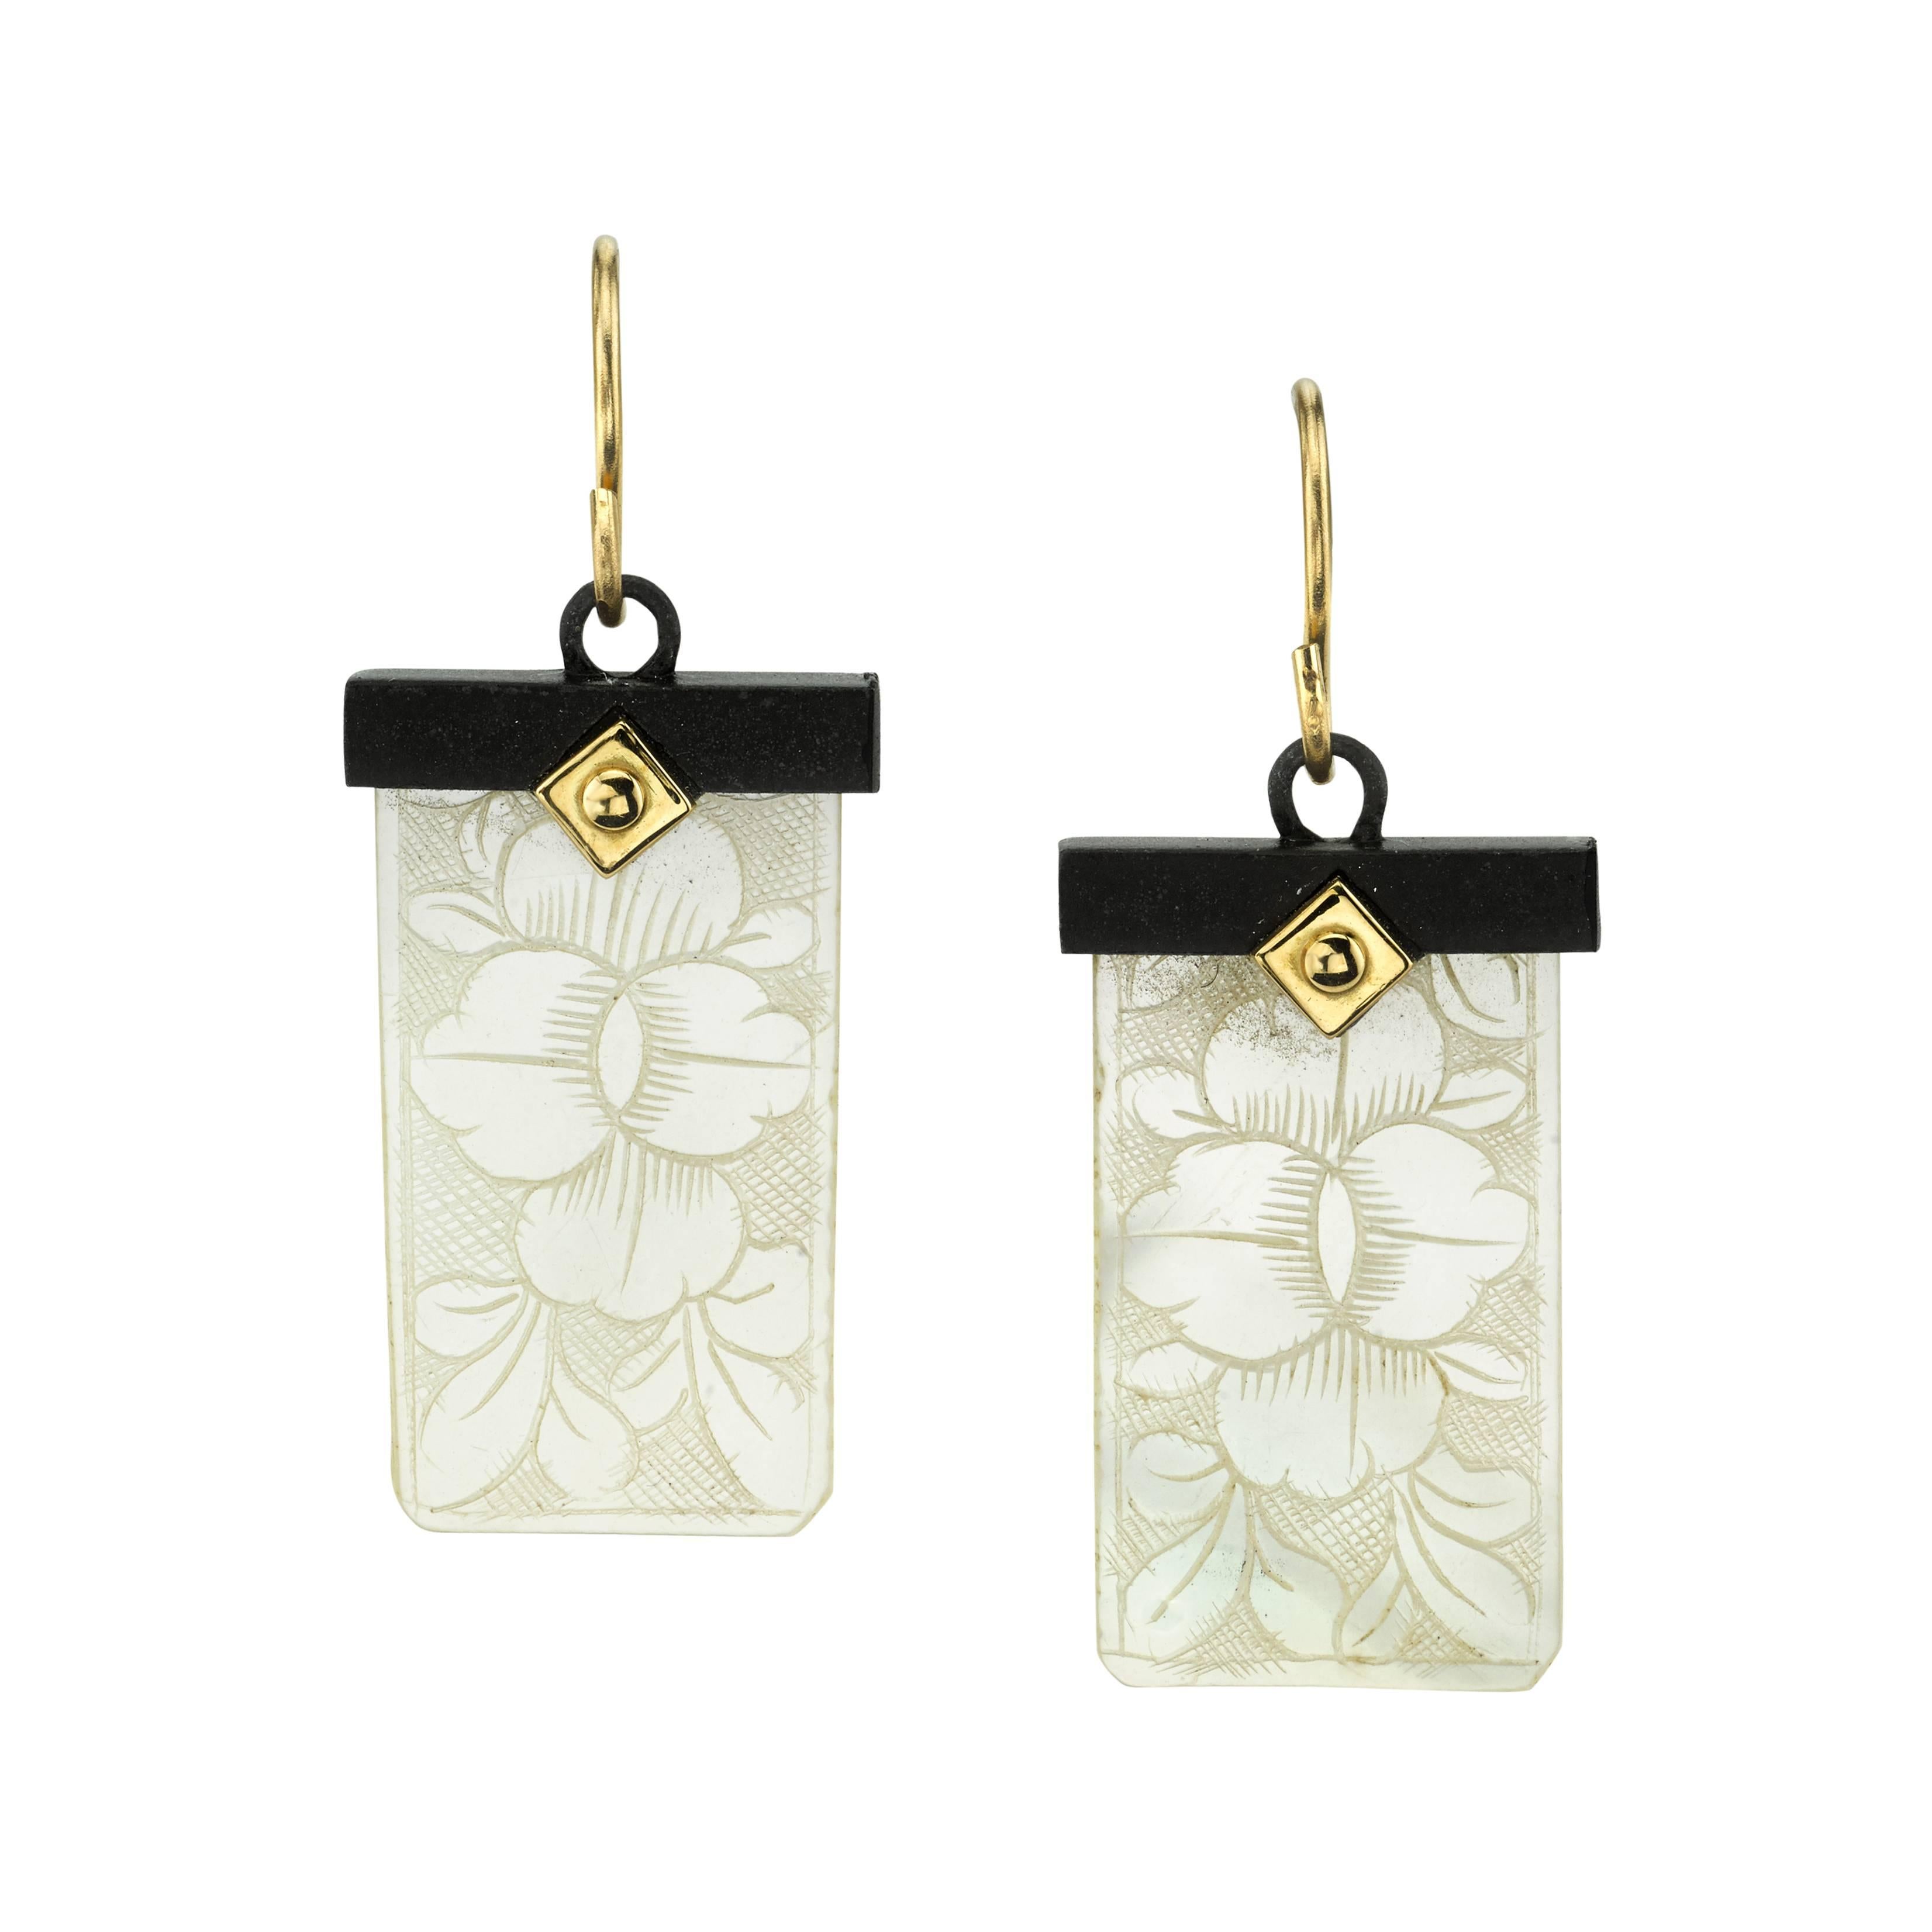 These earrings feature Chinese gaming counters with motifs dating back to the 18th Century. Each gaming counter is set in a handmade 18k yellow gold and blackened silver mounting inspired by the architecture of Ancient China. 

Handmade by our